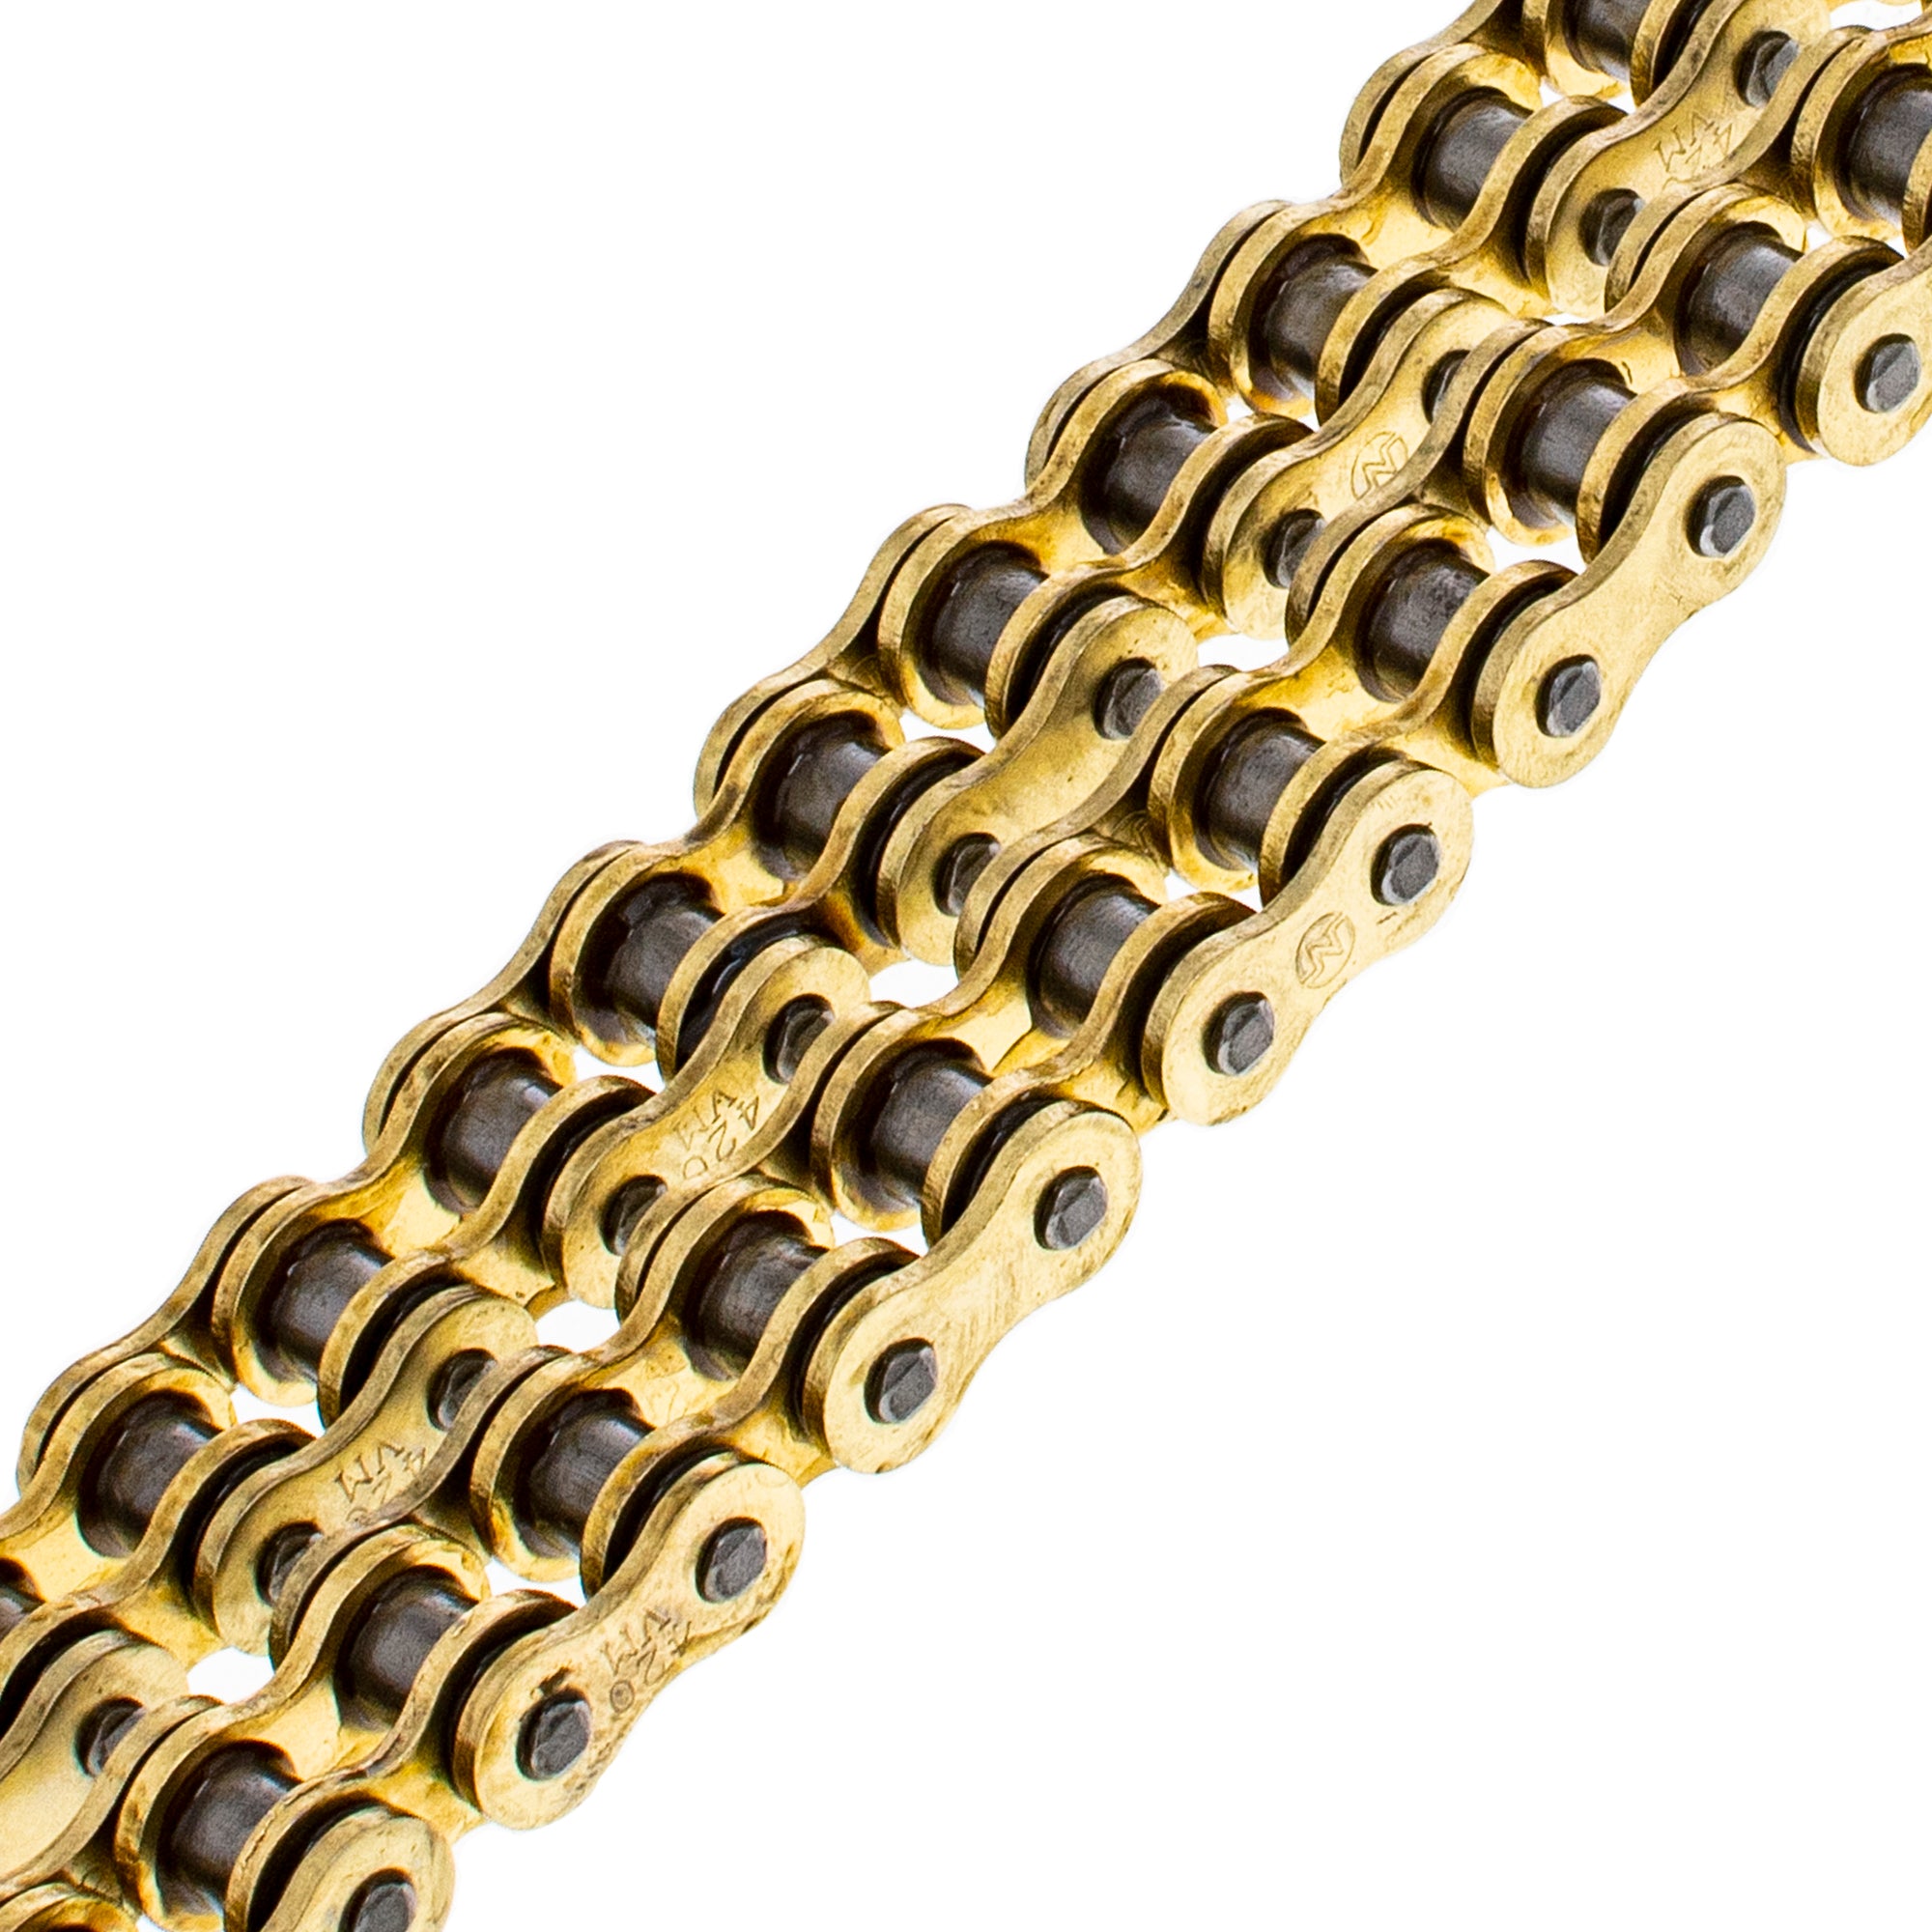 Gold X-Ring Chain 102 w/ Master Link for zOTHER KD80 DT100 9Y580-52101-00 NICHE 519-CDC2500H